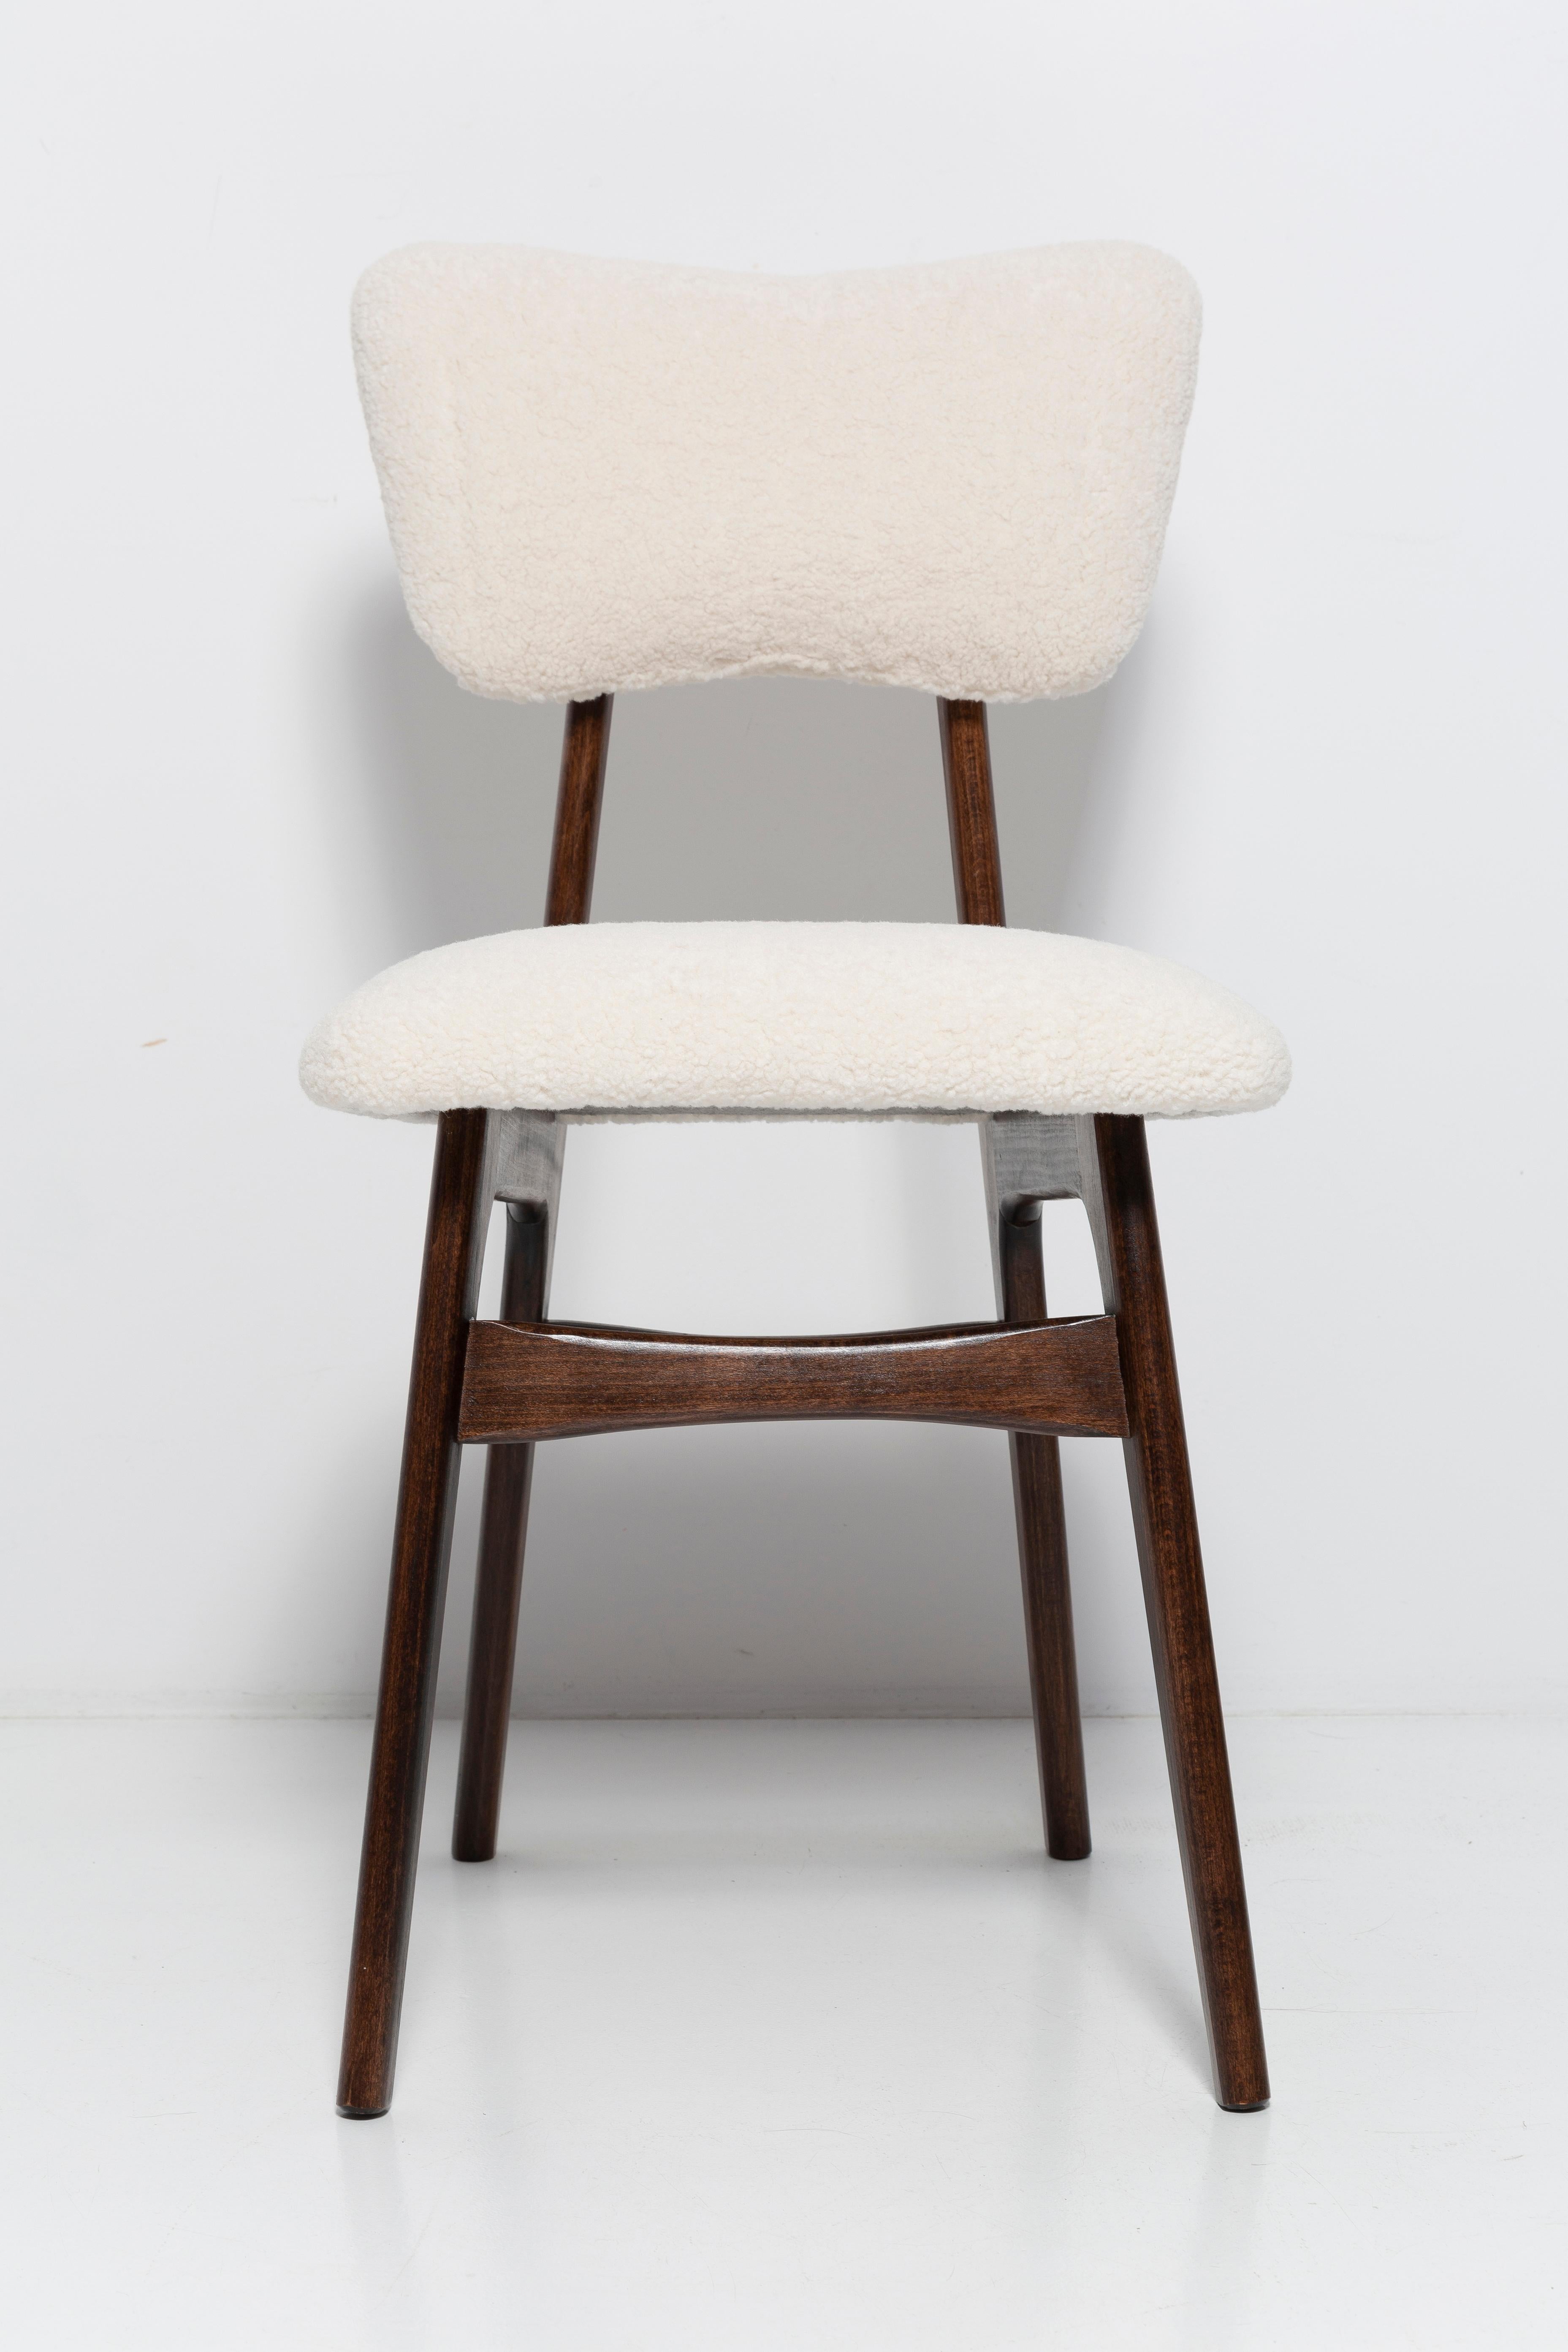 20th Century Light Crème Boucle Walnut Wood Butterfly Chair, Europe, 1960. For Sale 4